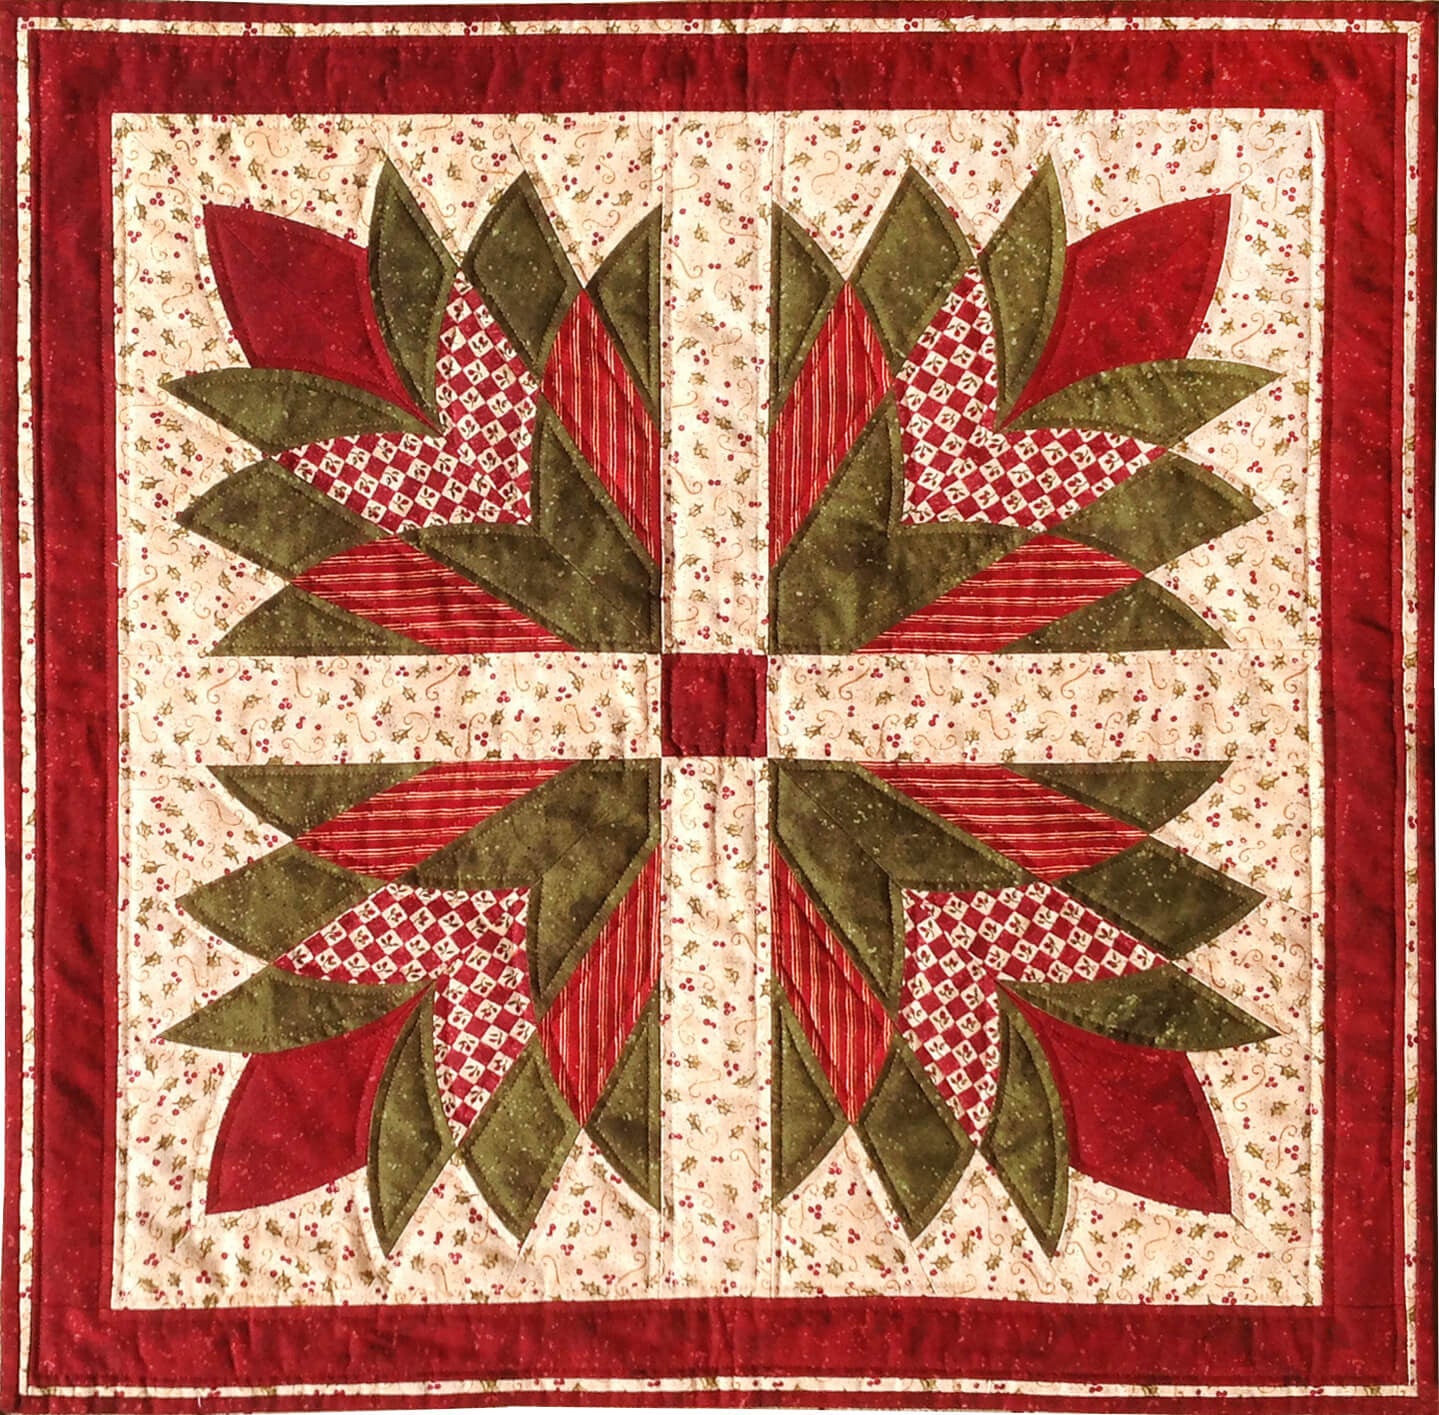 Cleopatra's Fan acrylic quilt template by Quilting from the Heartland